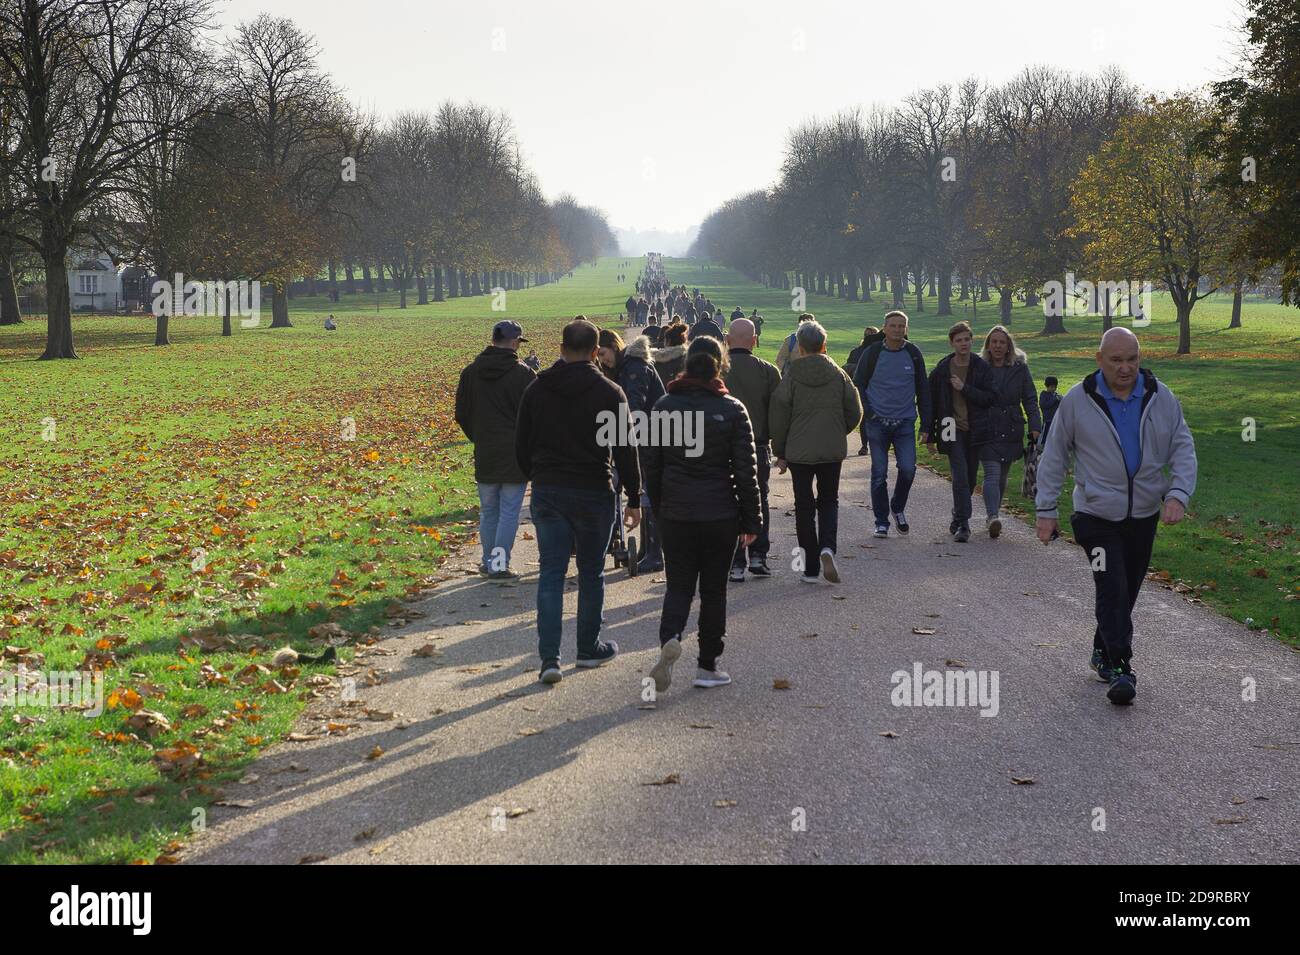 Windsor, Berkshire, UK. 7th November, 2020. Day 3 of the second Covid-19 Coronavirus lockdown in England. In what was one of the busiest days since the wedding of Prince Harry to Meghan Markle, hundreds of people were out walking on the Long Walk in Windsor today. Credit: Maureen McLean/Alamy Live News Stock Photo